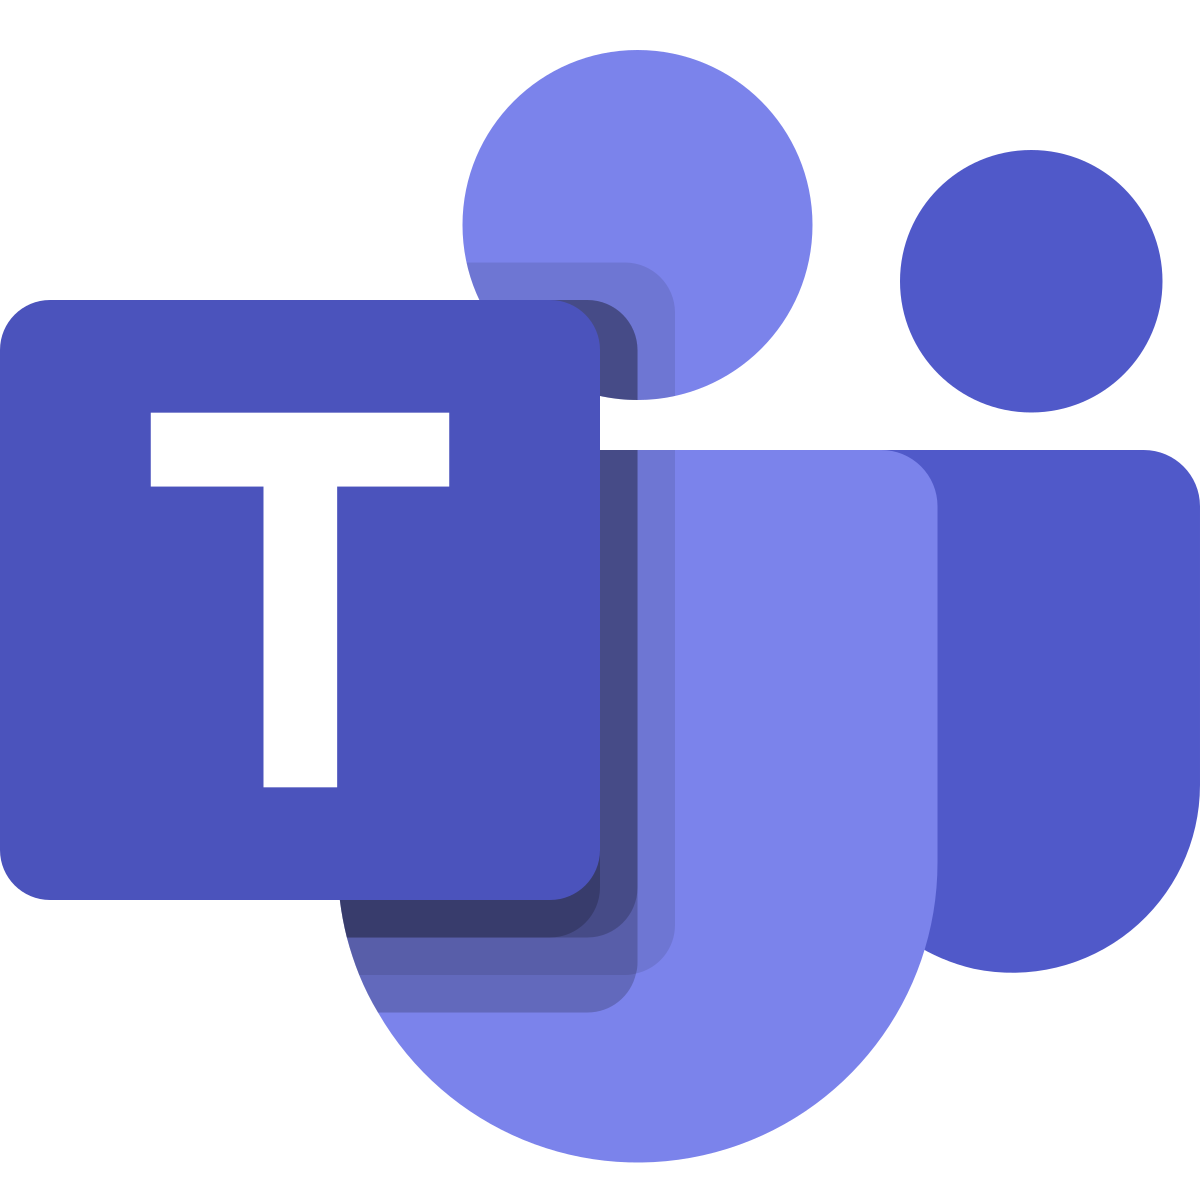 Getting started with Microsoft Teams Development - Part 1